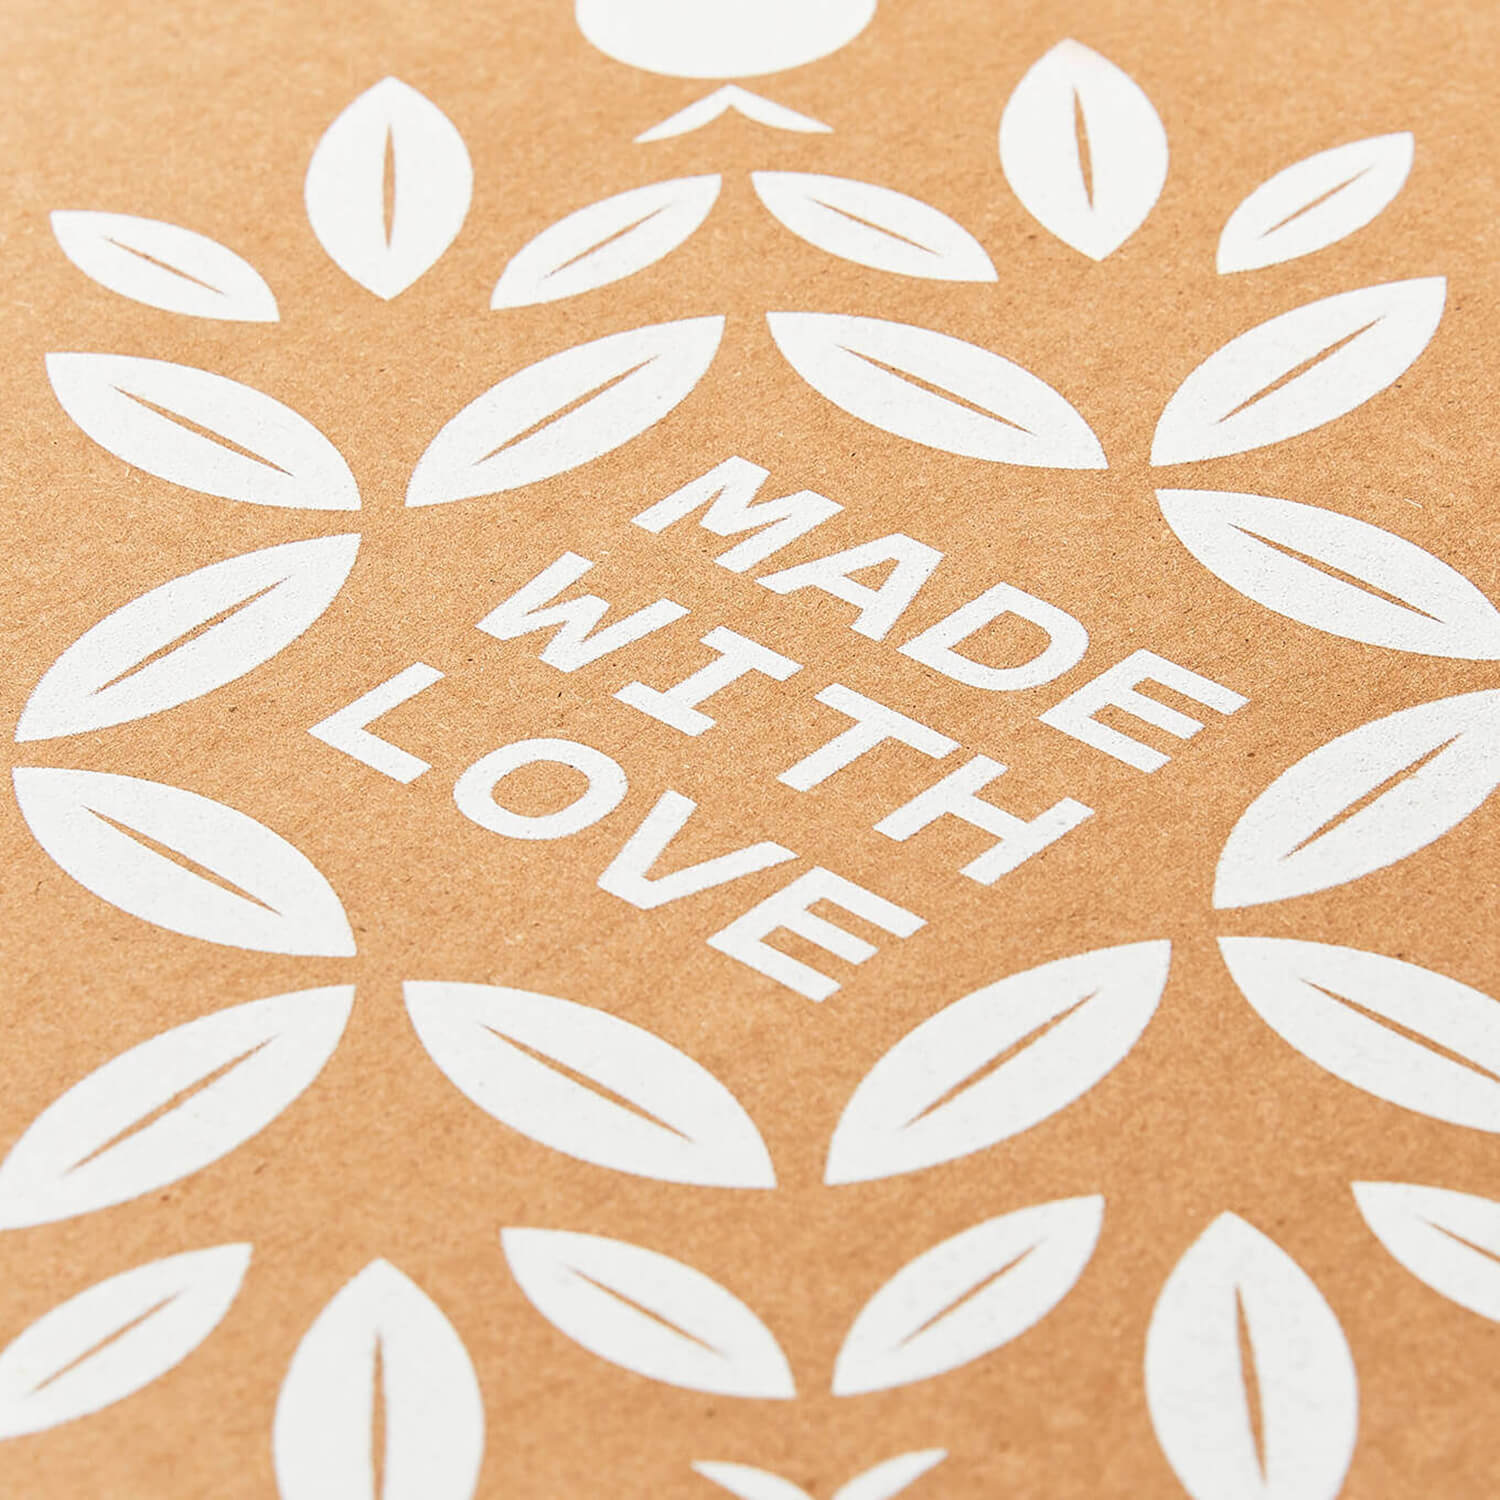 Close-up of 'Made With Love' surrounded by a leafy pattern on the interior lid of the Grazy box